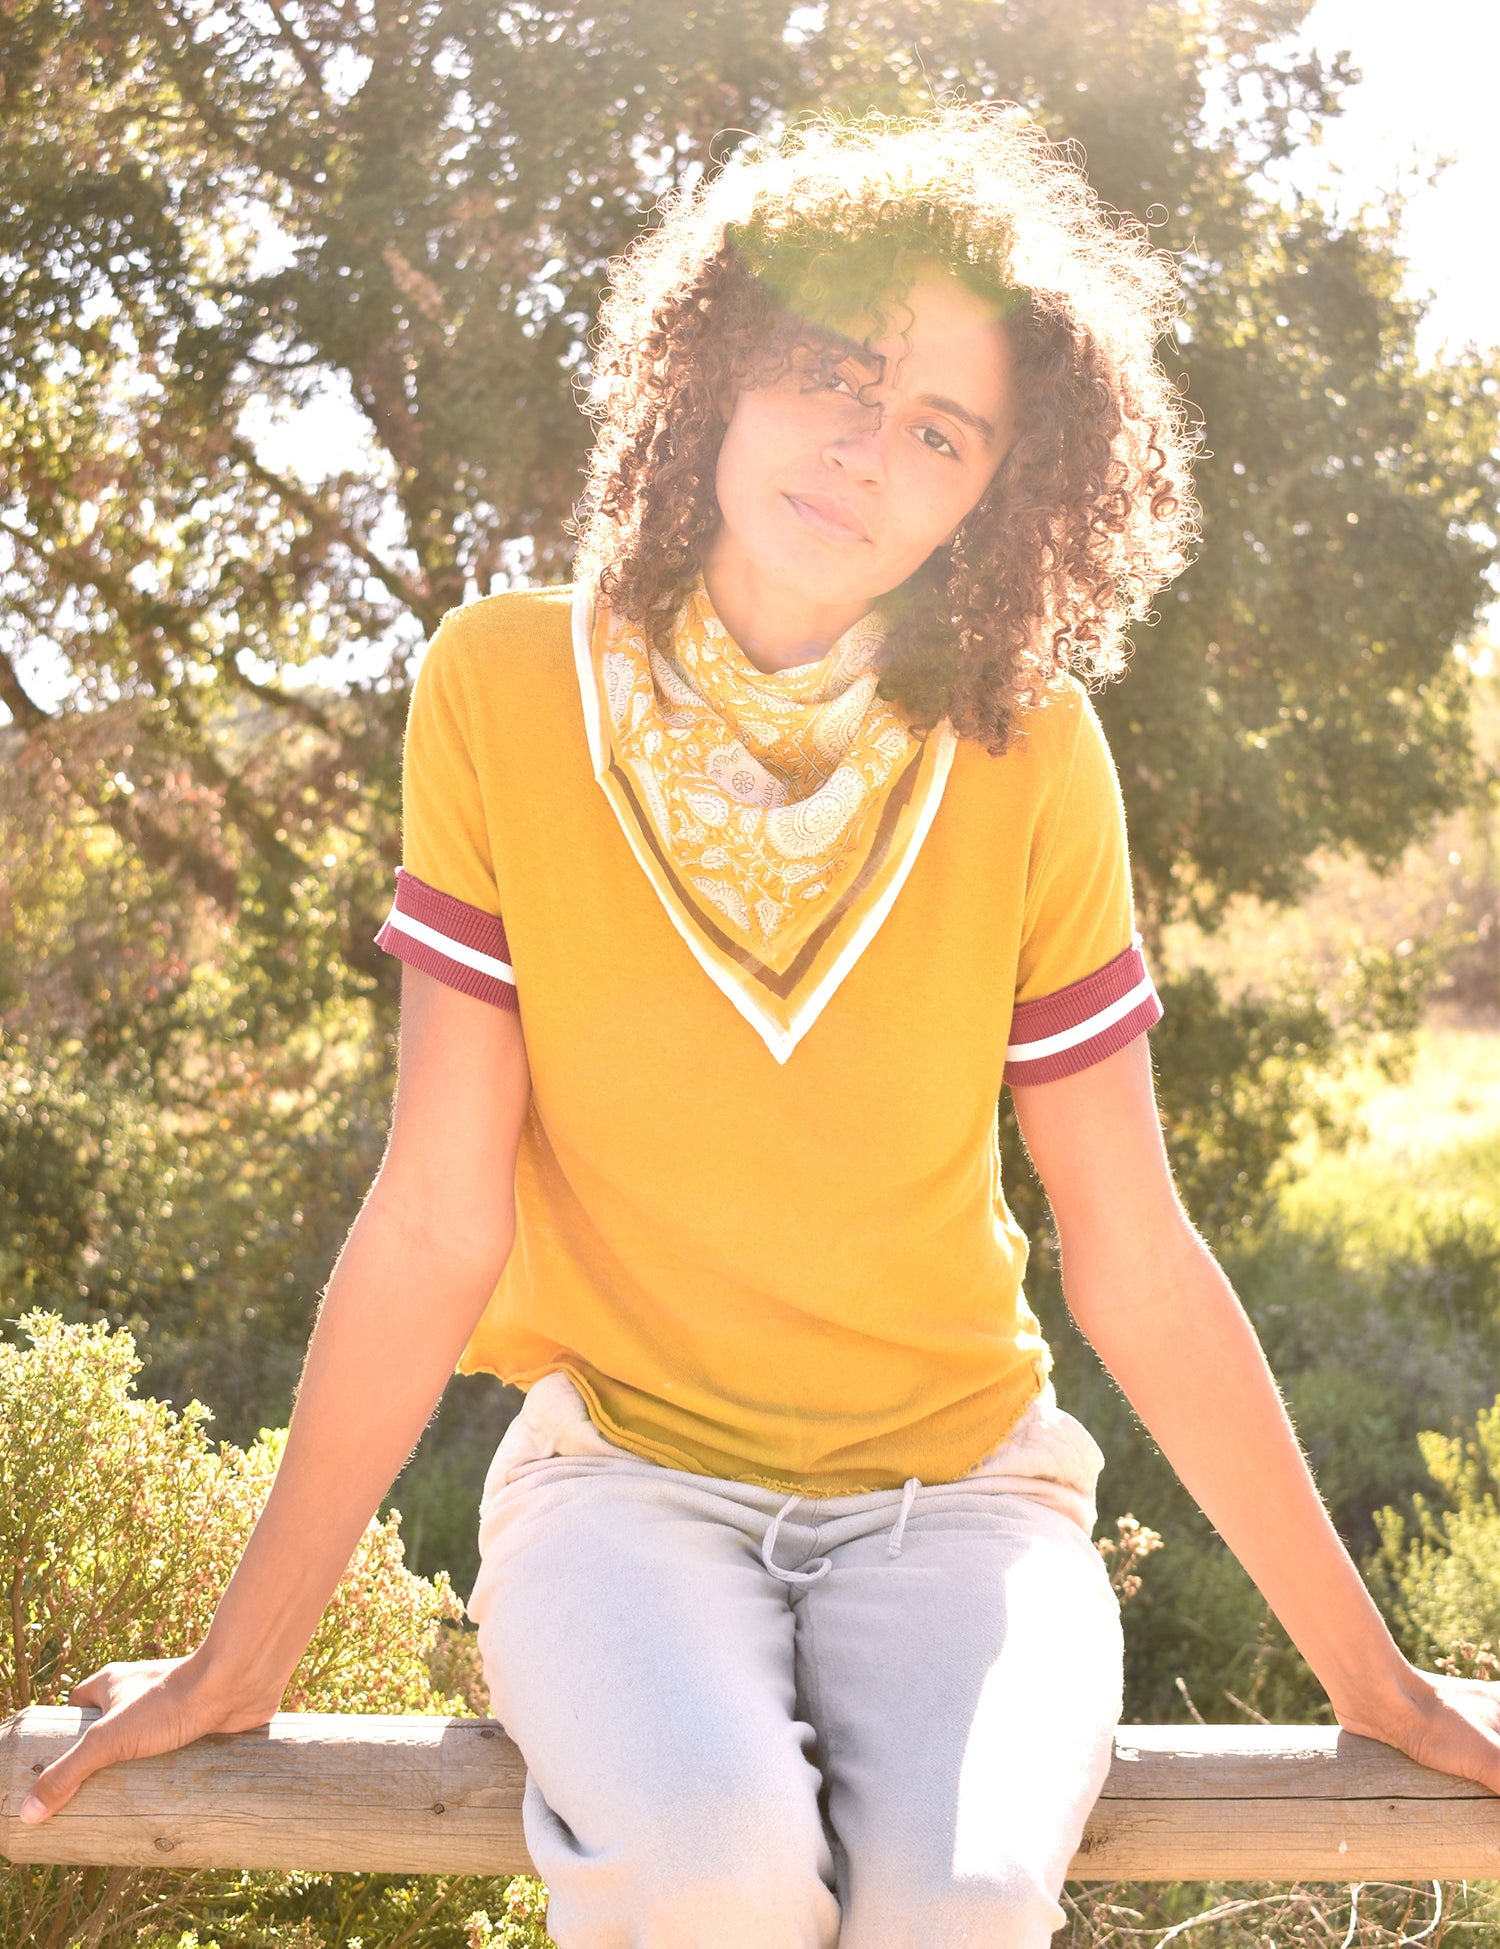 Woman wearing block print Tate bandana around the neck against a yellow tee shirt. Woman sitting on wooden fence with trees in the background.